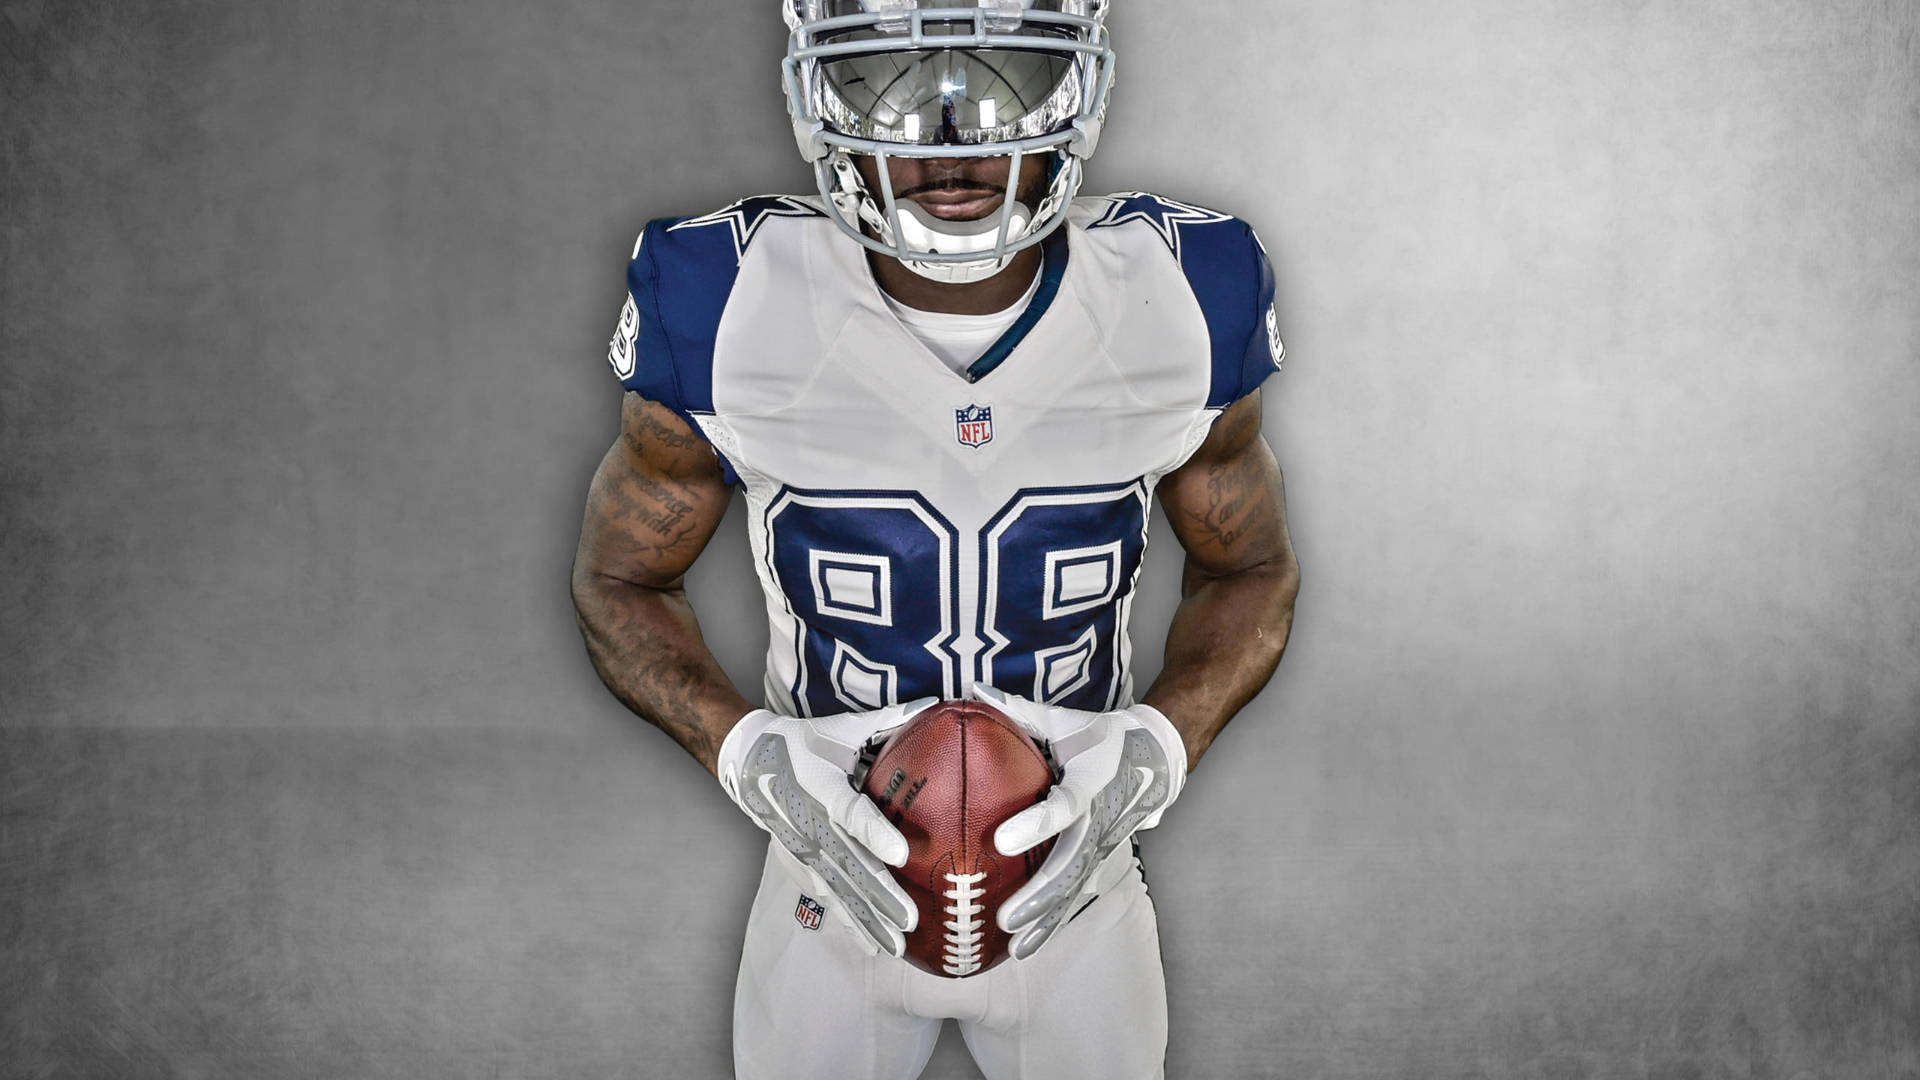 Download No. 88 Player Of Awesome Dallas Cowboys Wallpaper